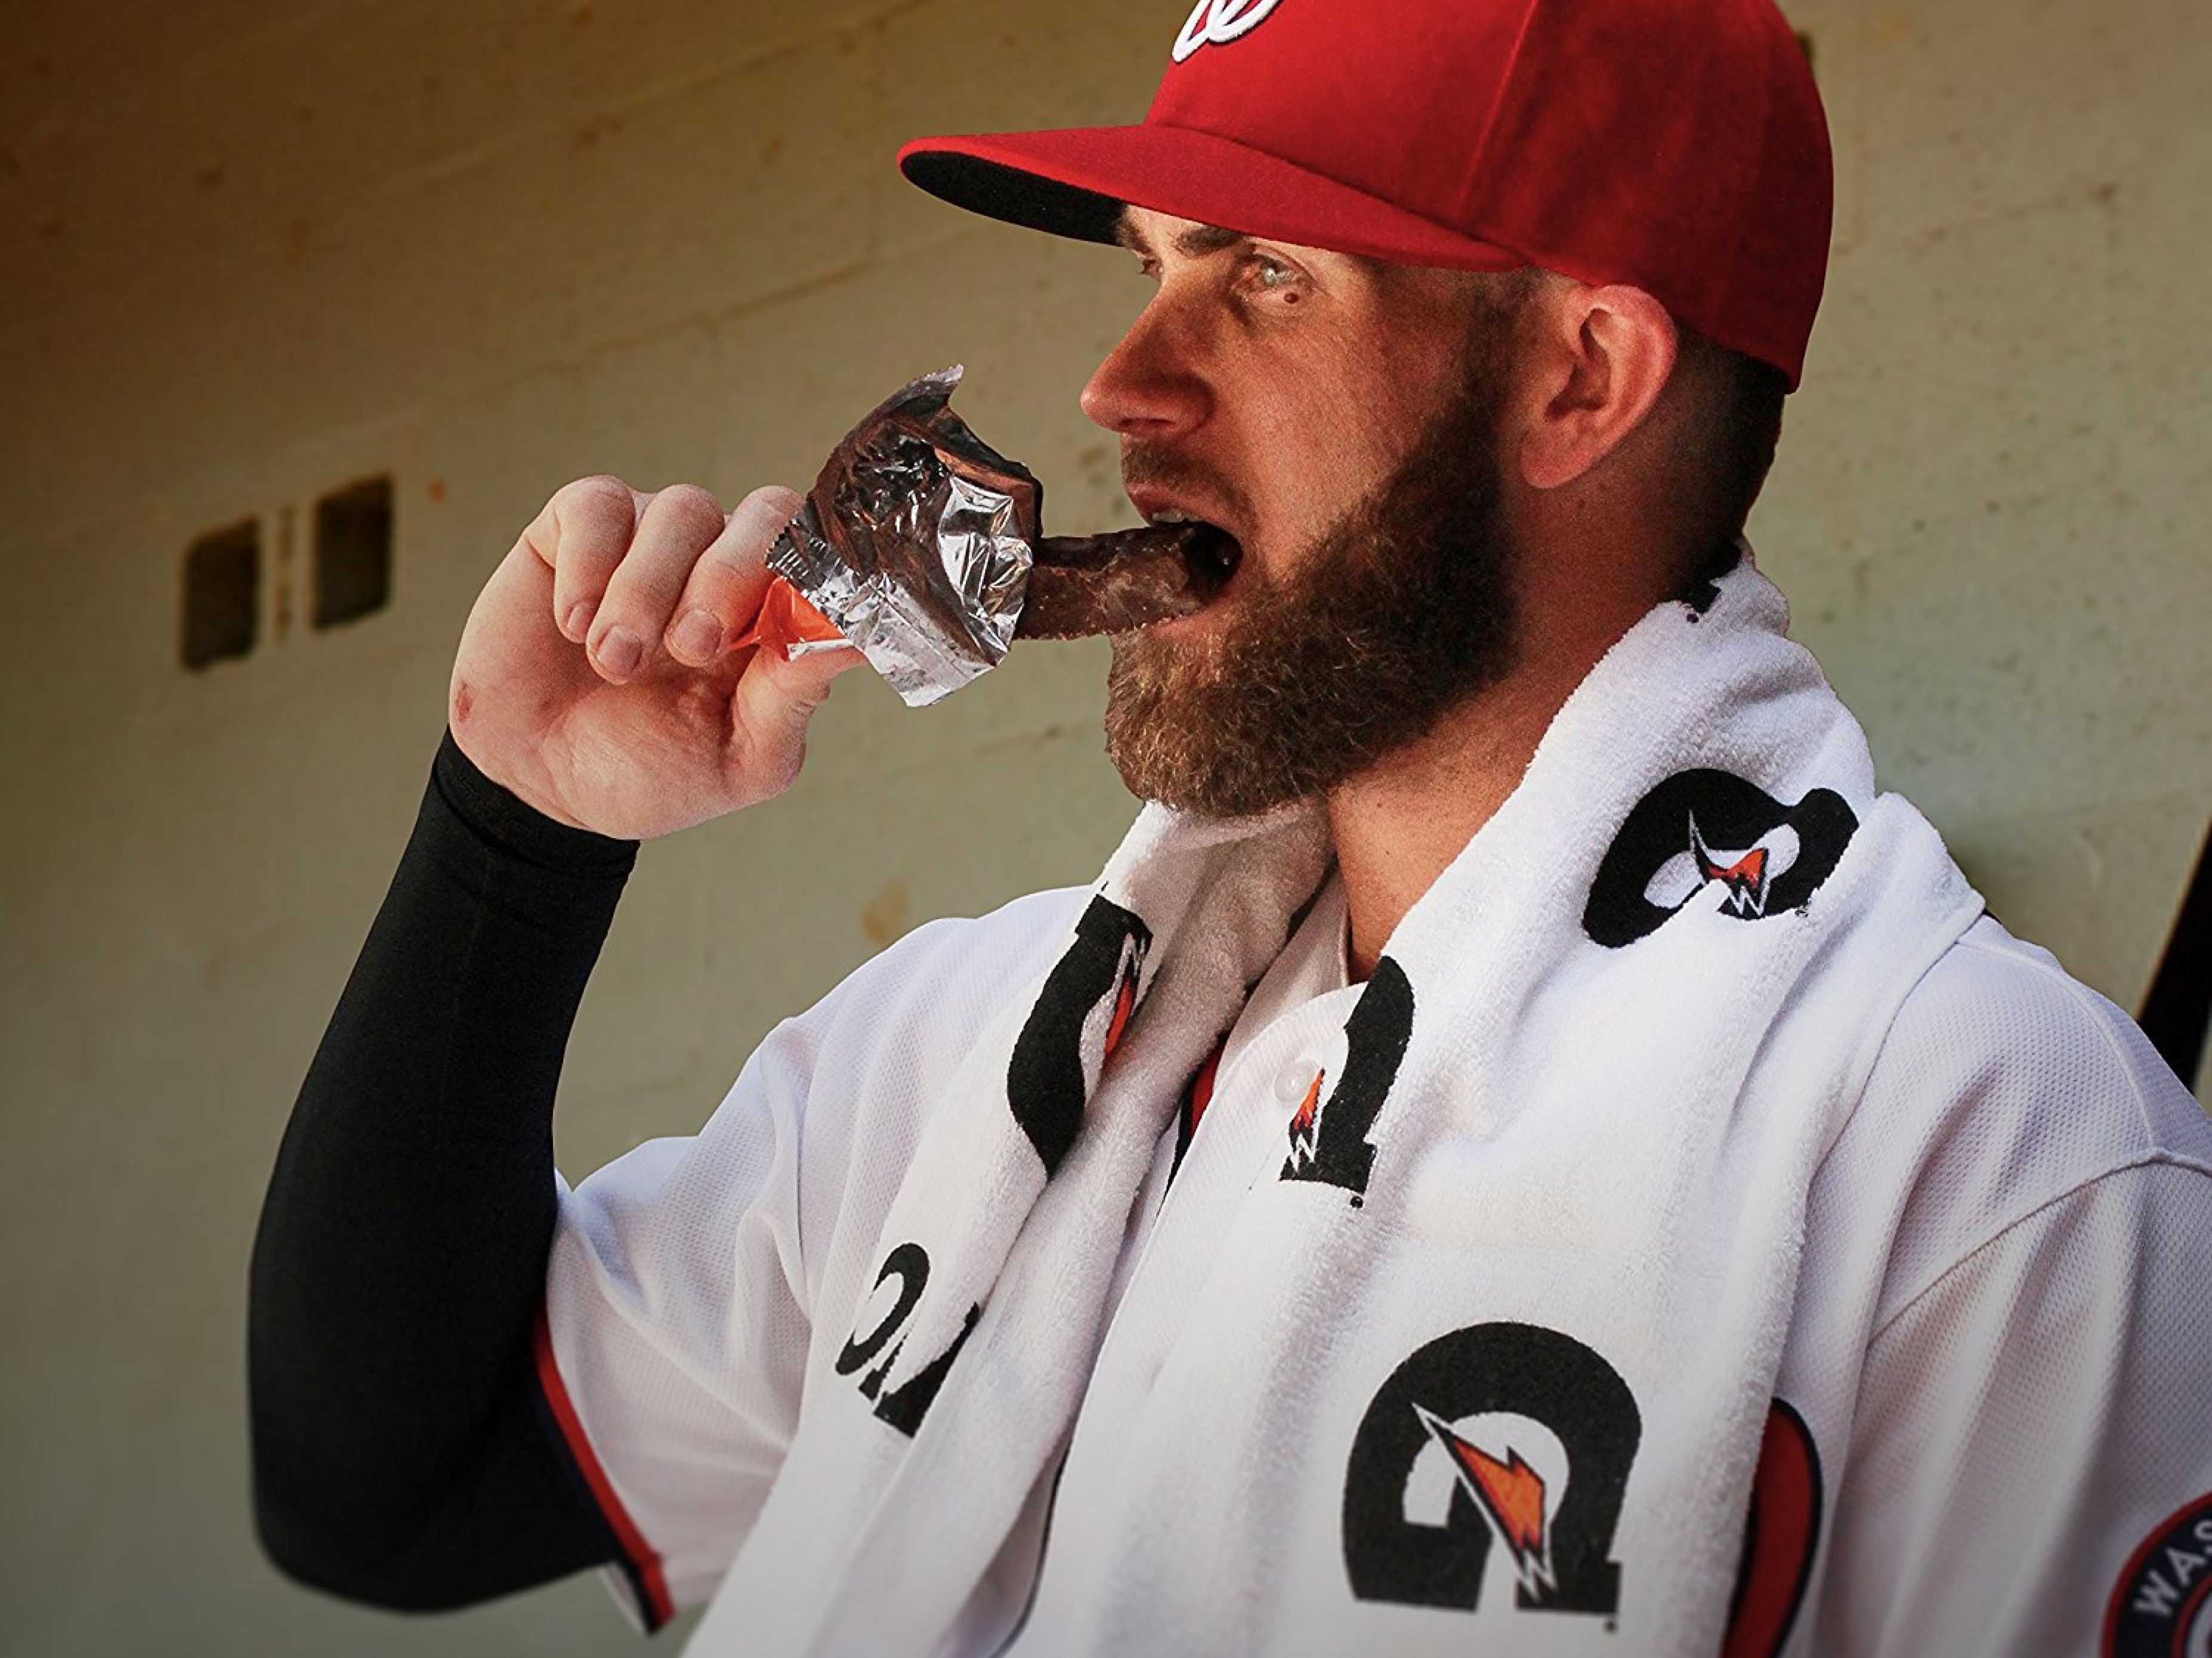 Bryce Harper eating a protein bar